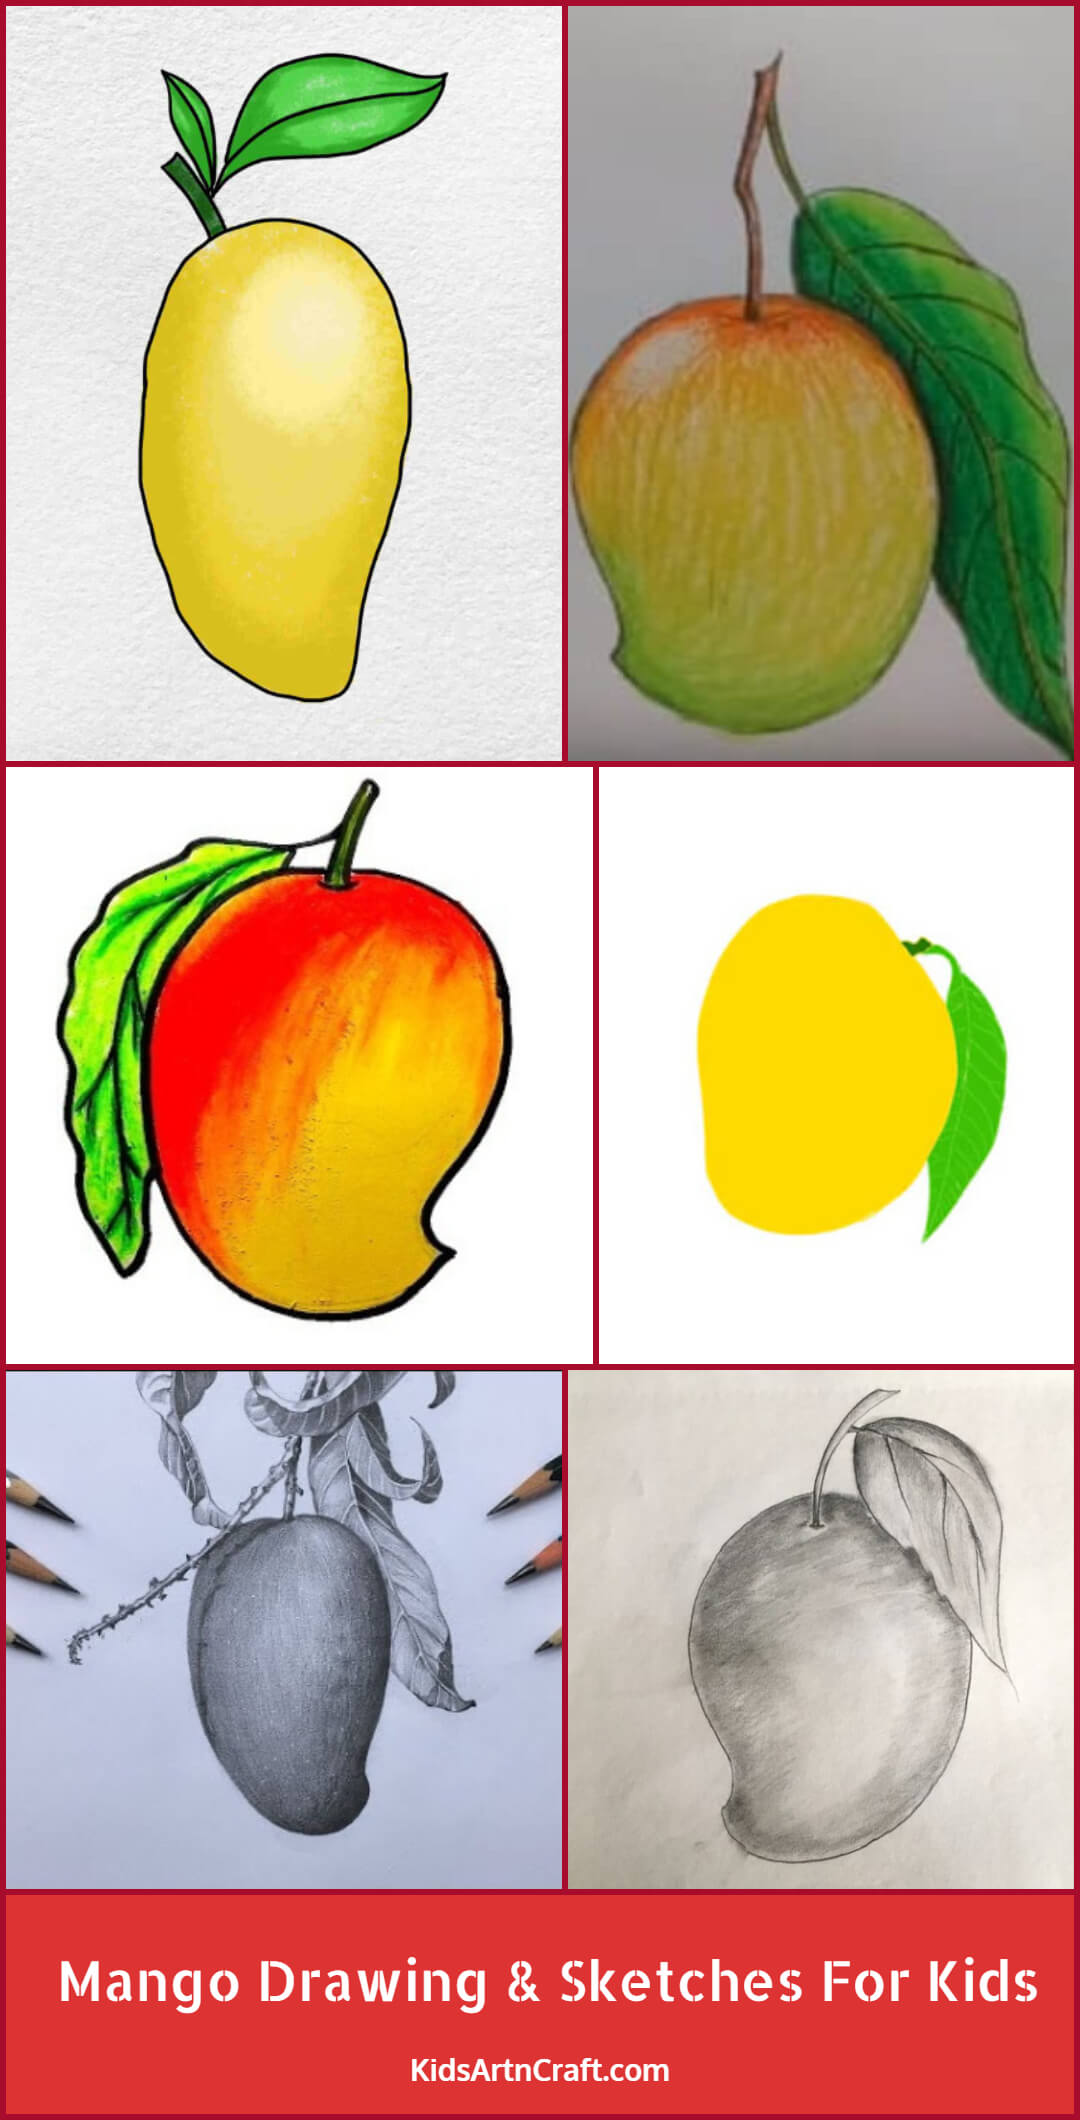 Mango Drawing & Sketches for Kids